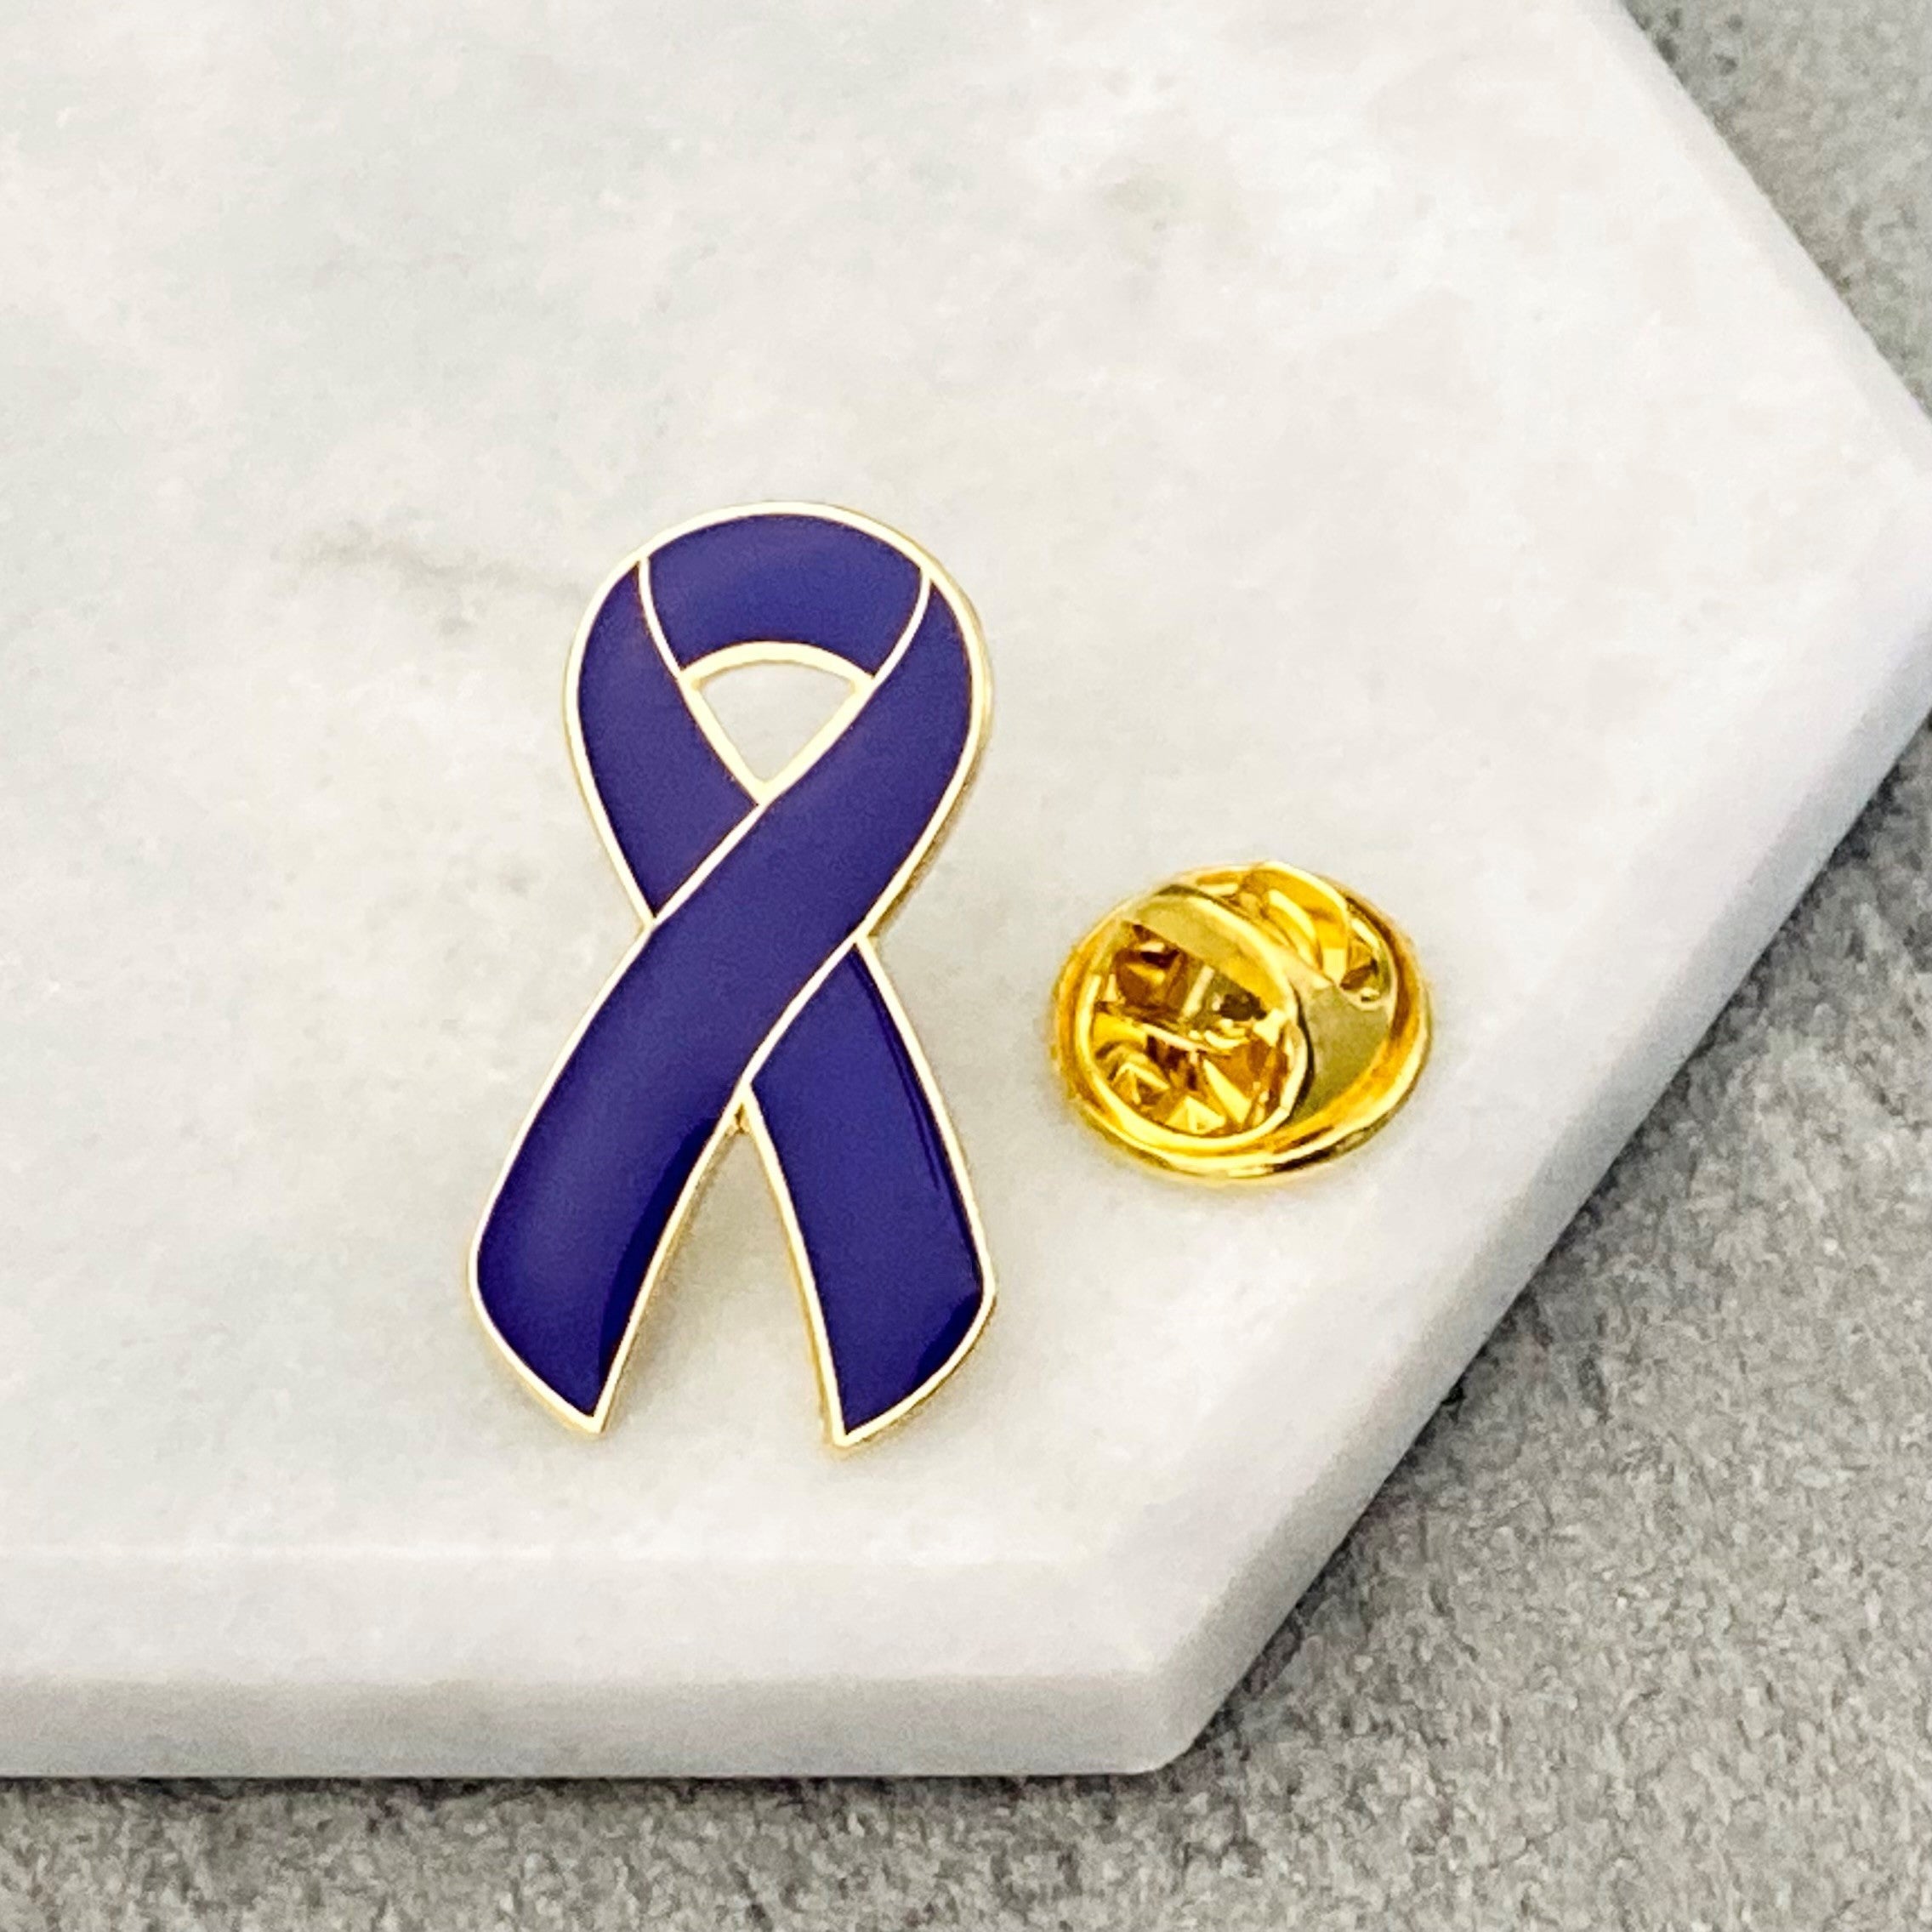 Epilepsy Awareness Jewellery and Accessories